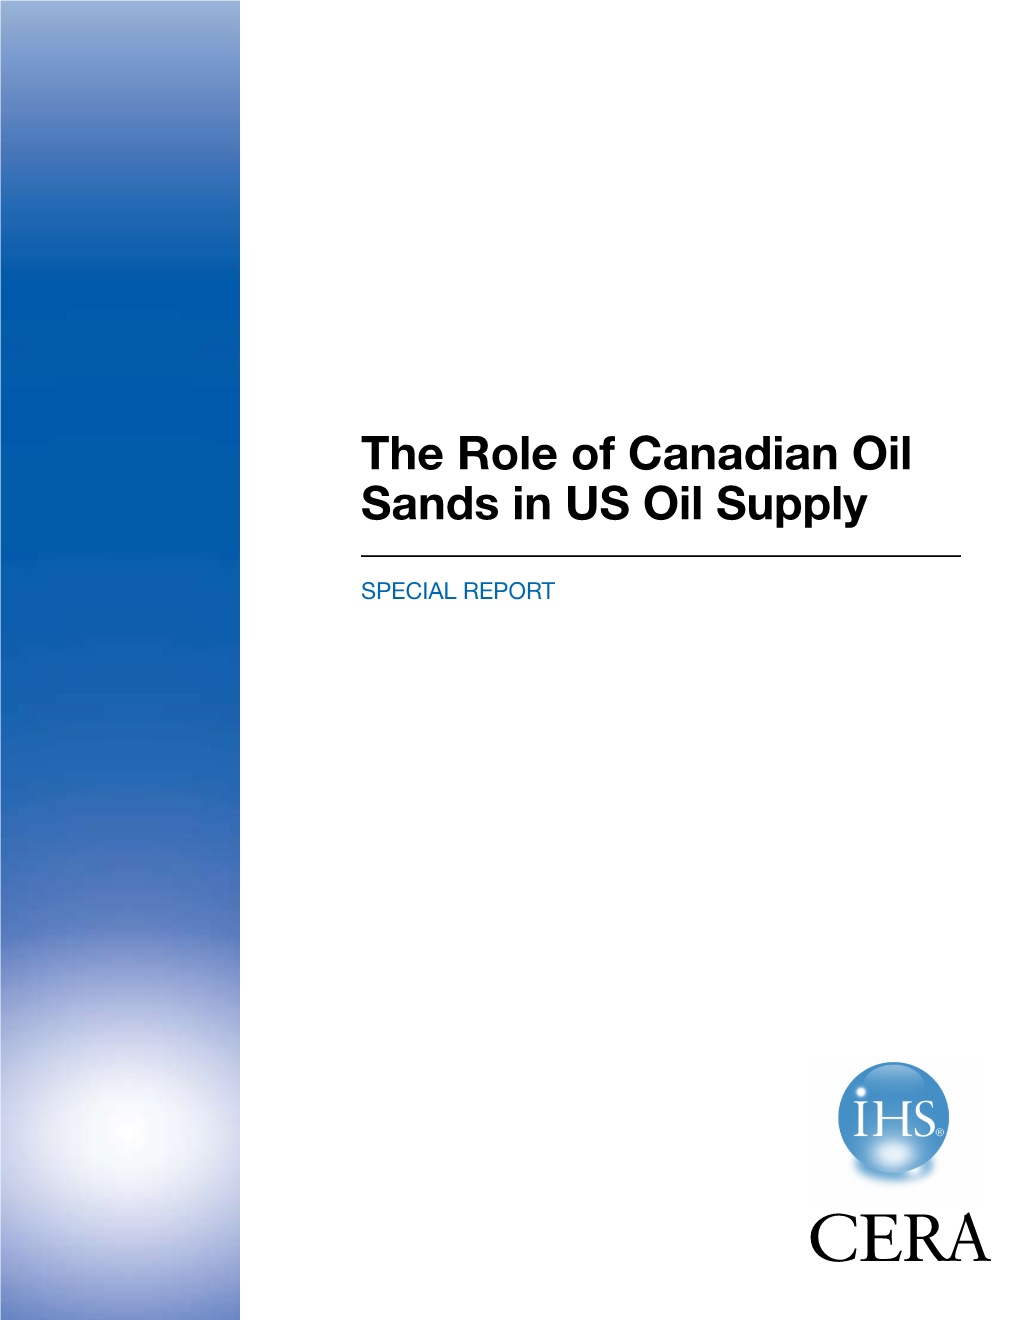 The Role of Canadian Oil Sands in US Oil Supply